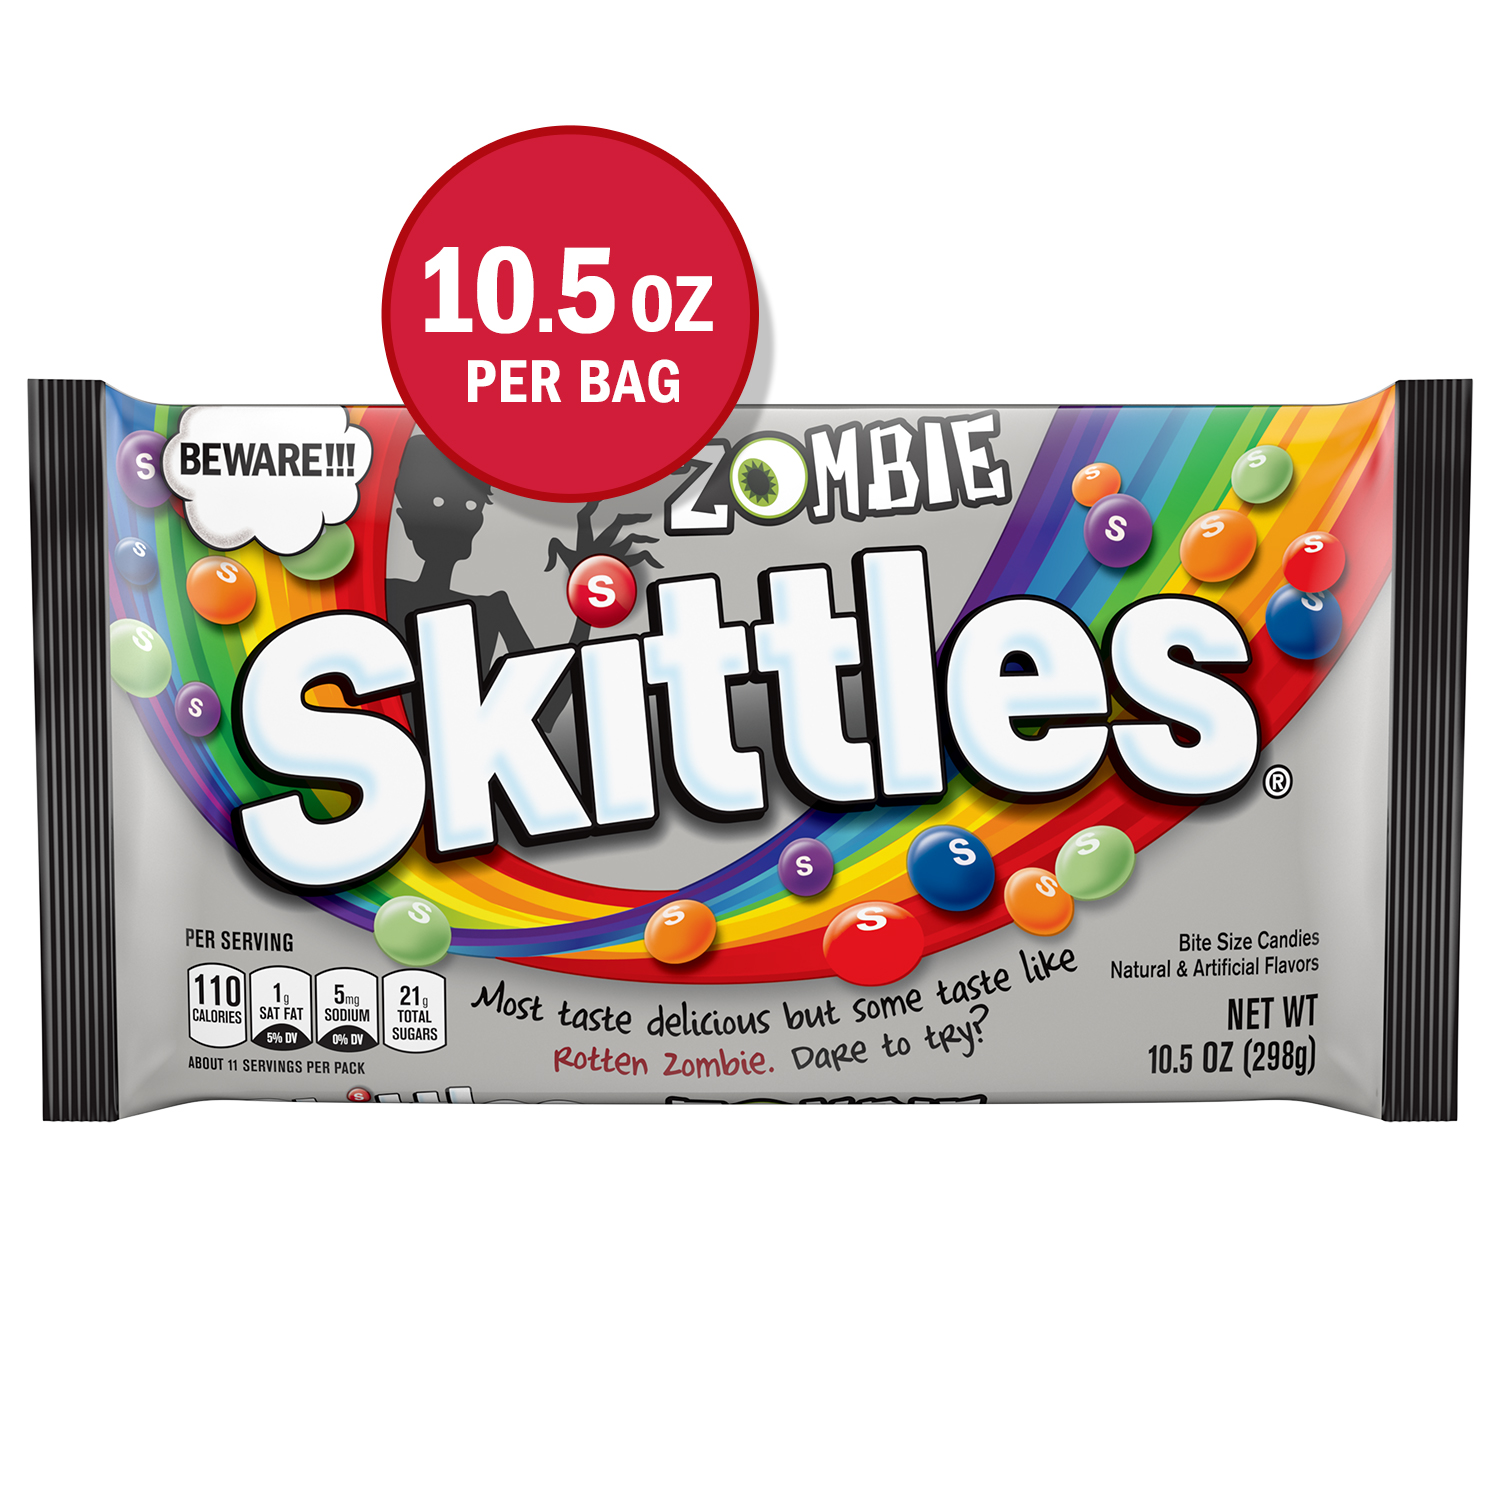 Zombie SKITTLES Halloween Candy, 10.5-Ounce Bag - image 2 of 8